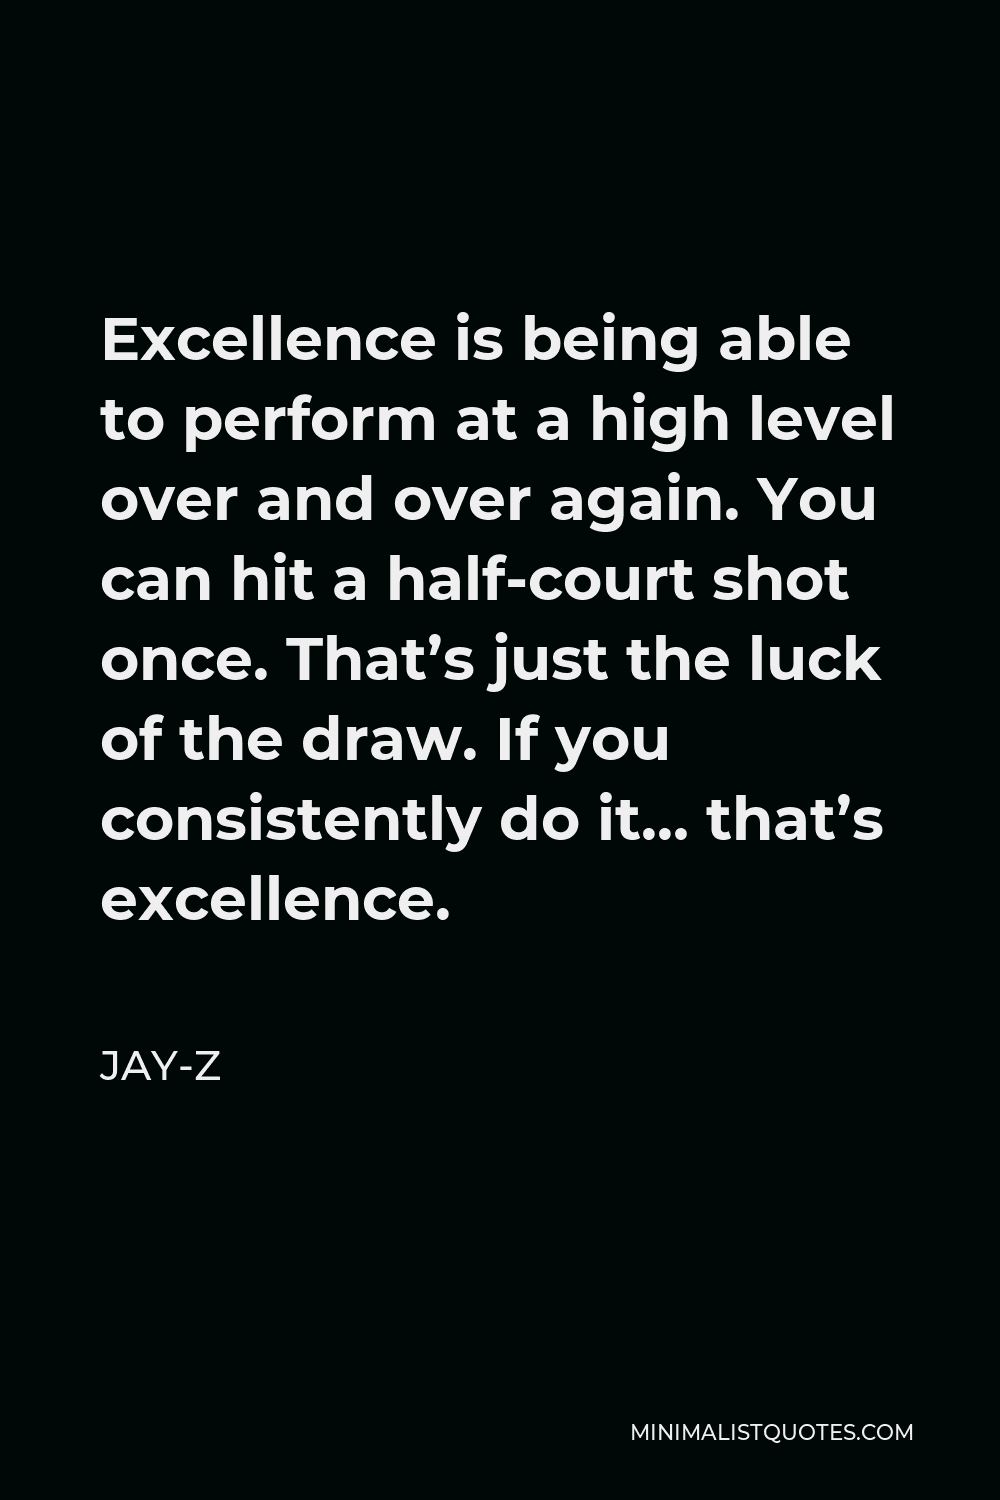 Jay-Z Quote - Excellence is being able to perform at a high level over and over again. You can hit a half-court shot once. That’s just the luck of the draw. If you consistently do it… that’s excellence.